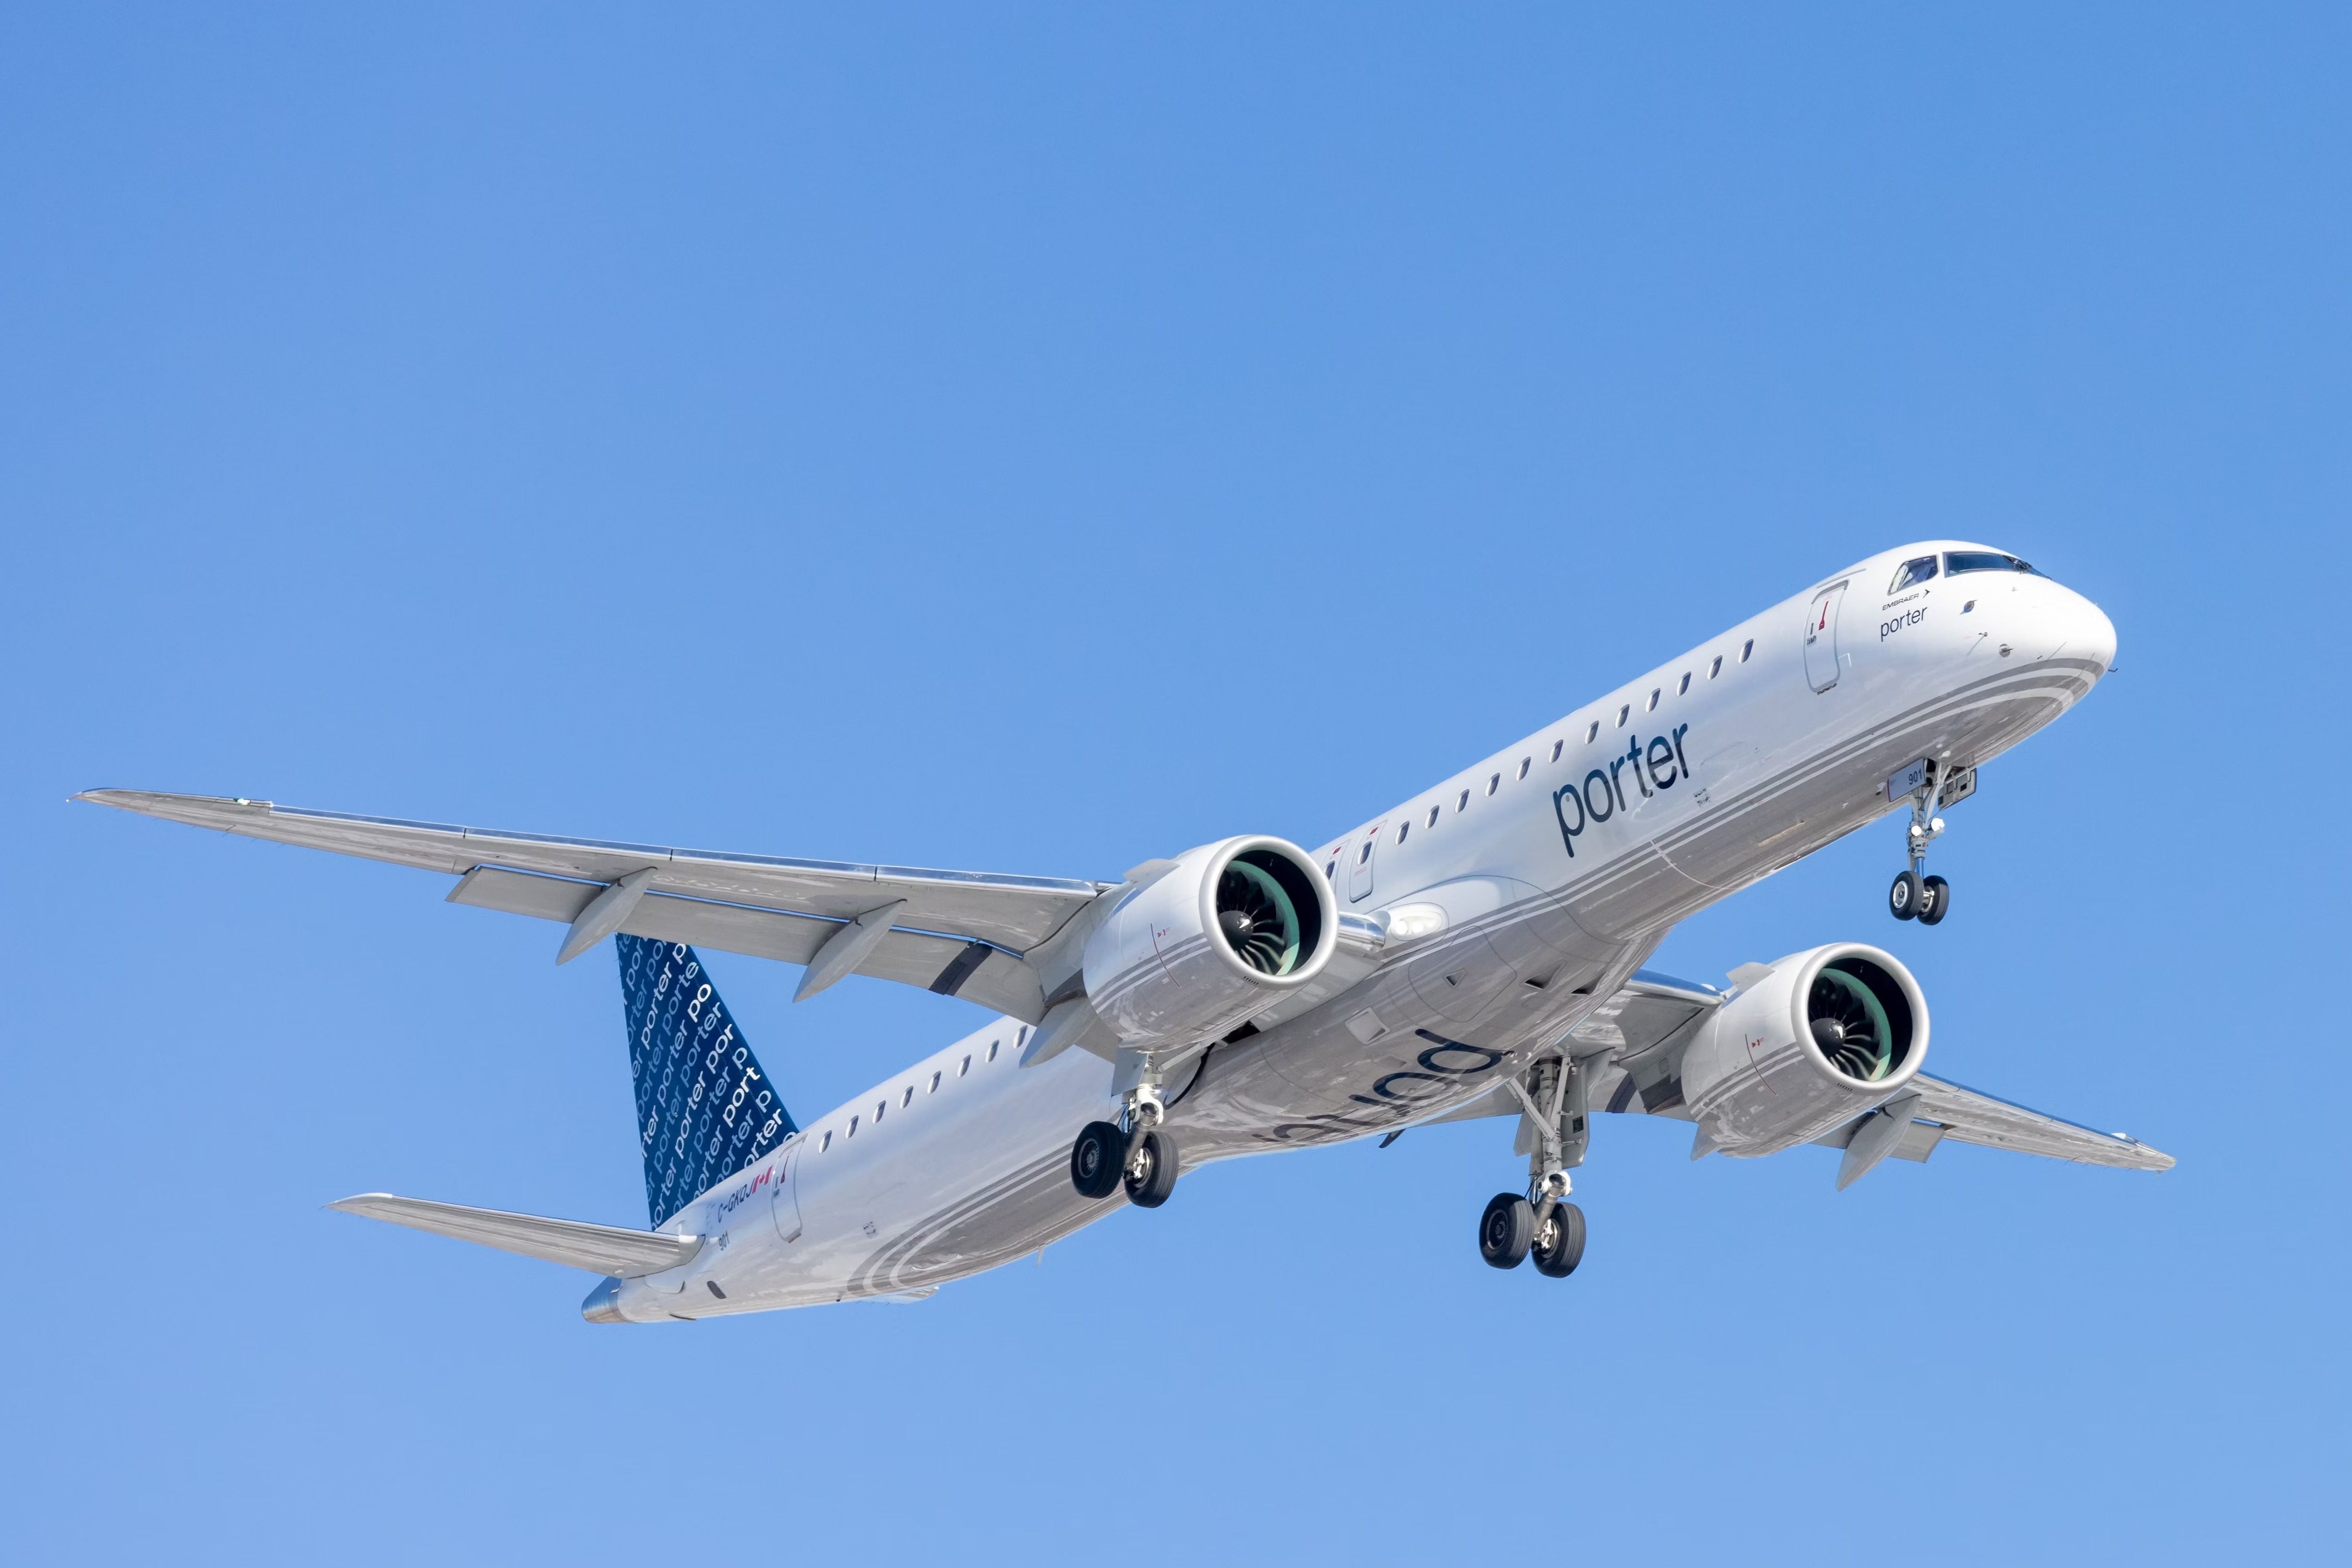 A Porter Airlines Embraer E195 flying in the sky.